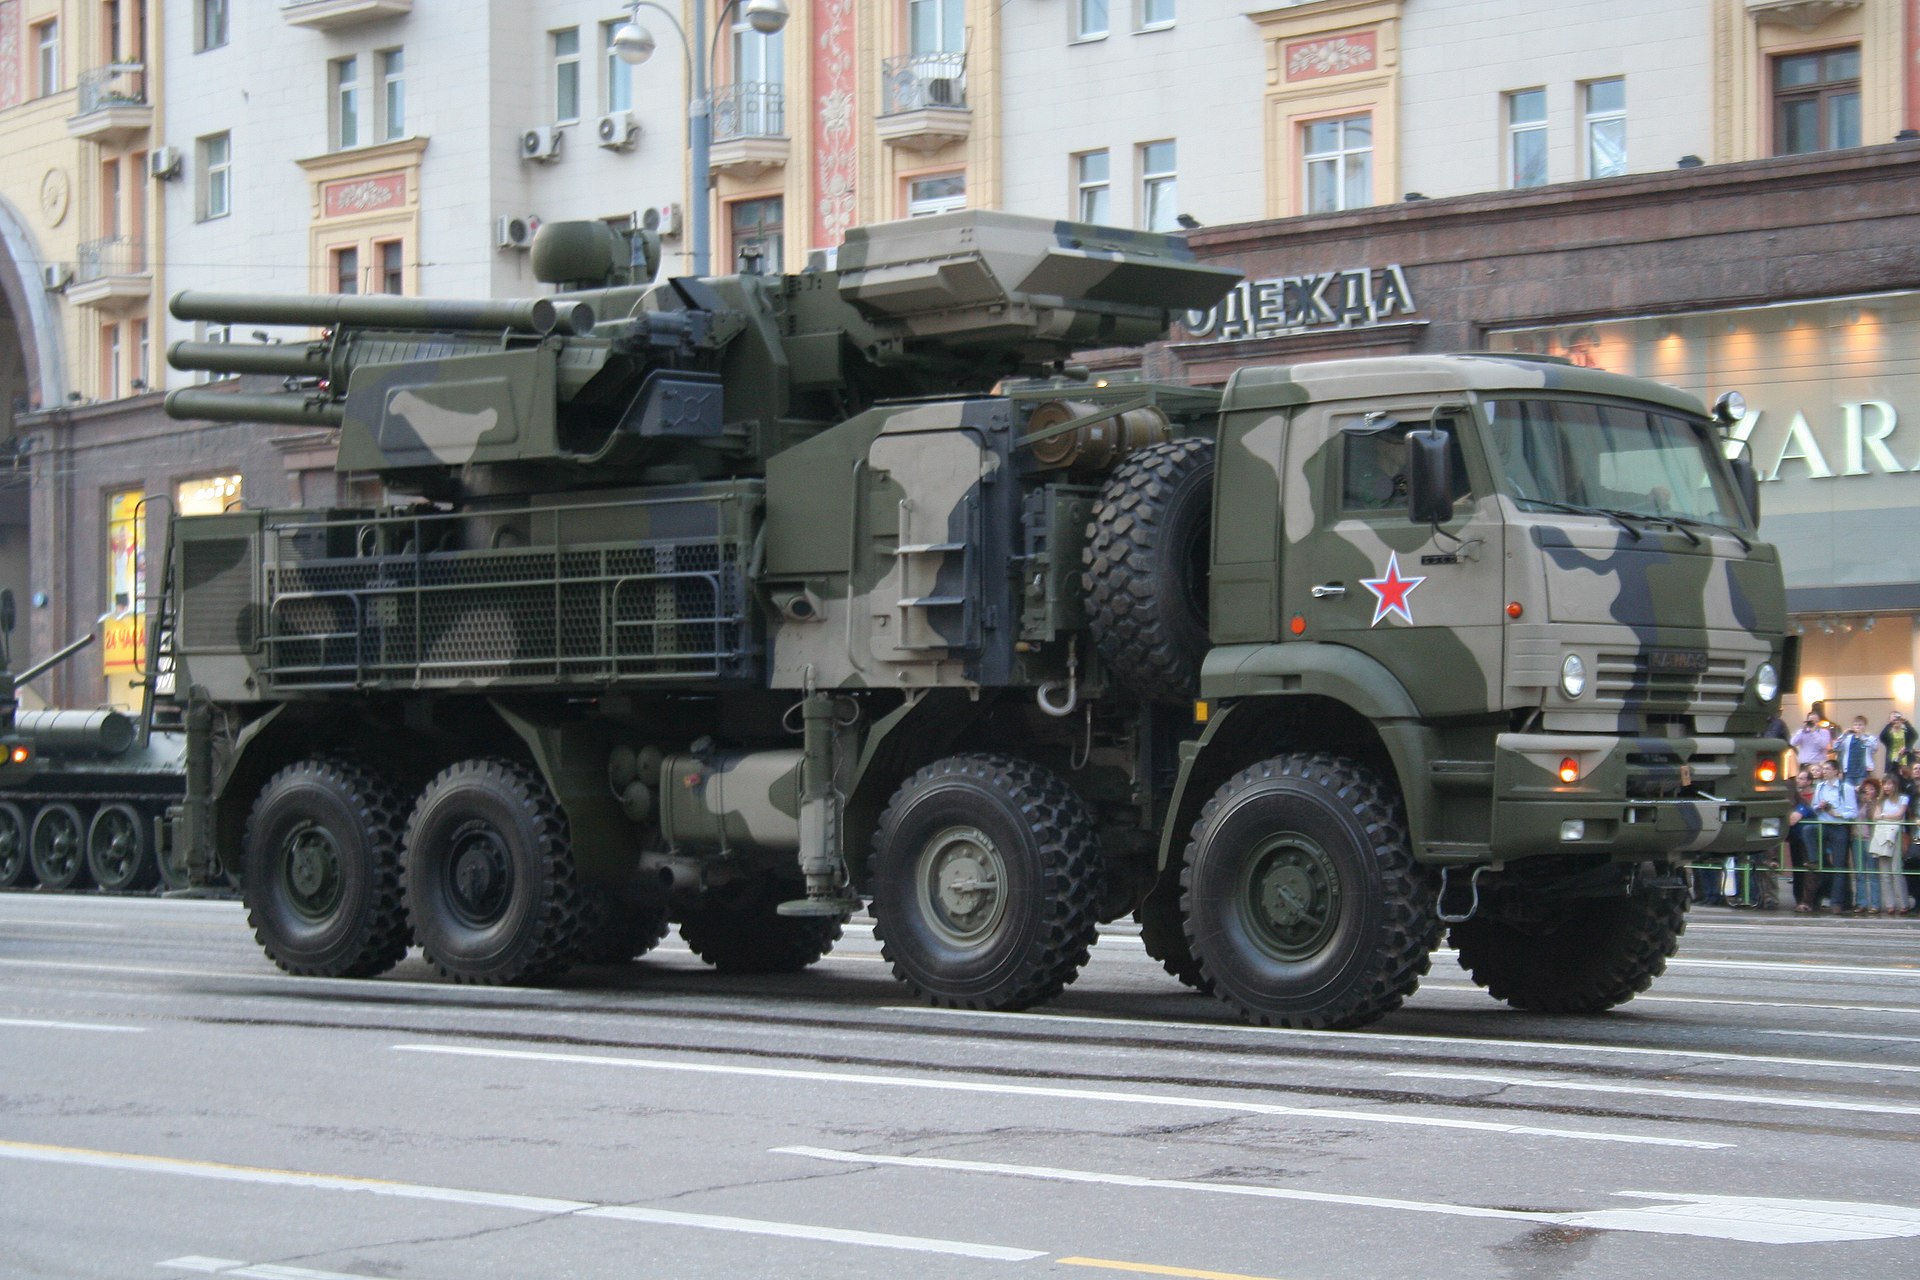 1920px-Moscow_Victory_Parade_2010_-_Training_on_May_4_-_img17.jpg